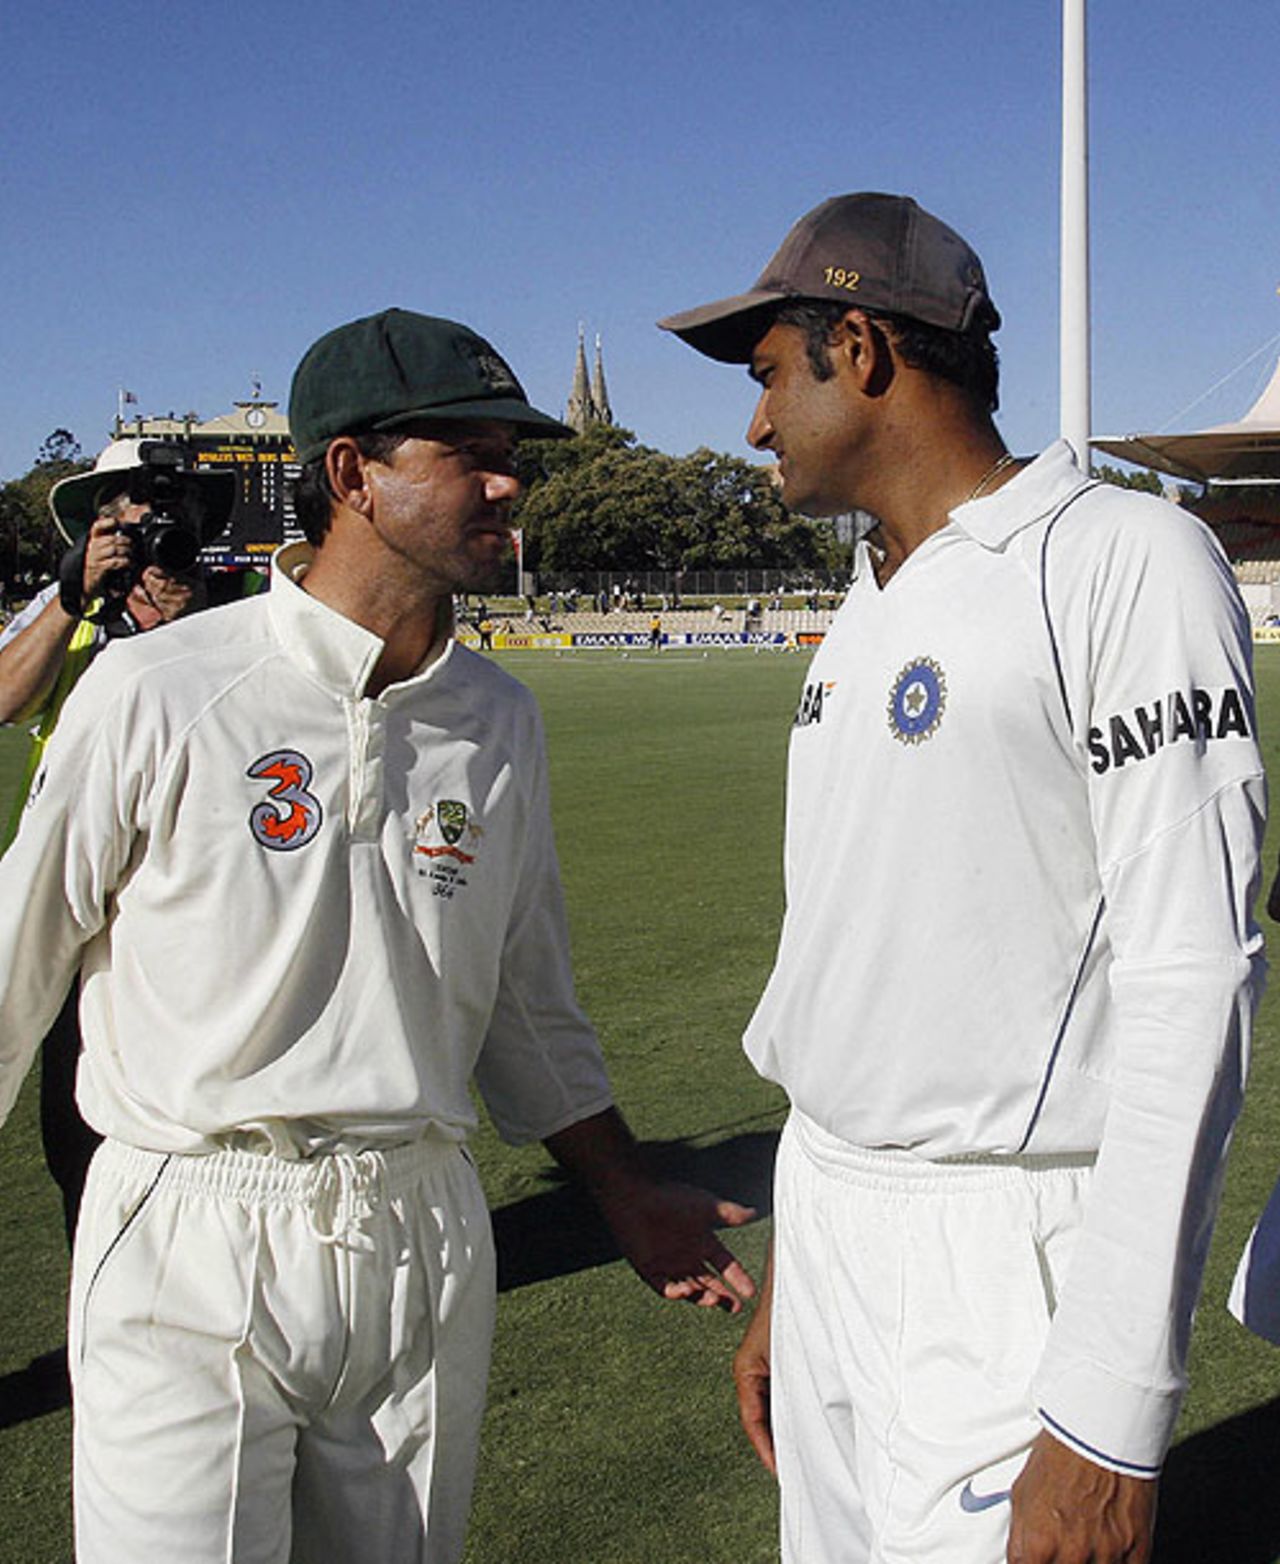 Ricky Ponting and Anil Kumble share a word after a draw in Adelaide, Australia v India, 4th Test, Adelaide, 5th day, January 28, 2008